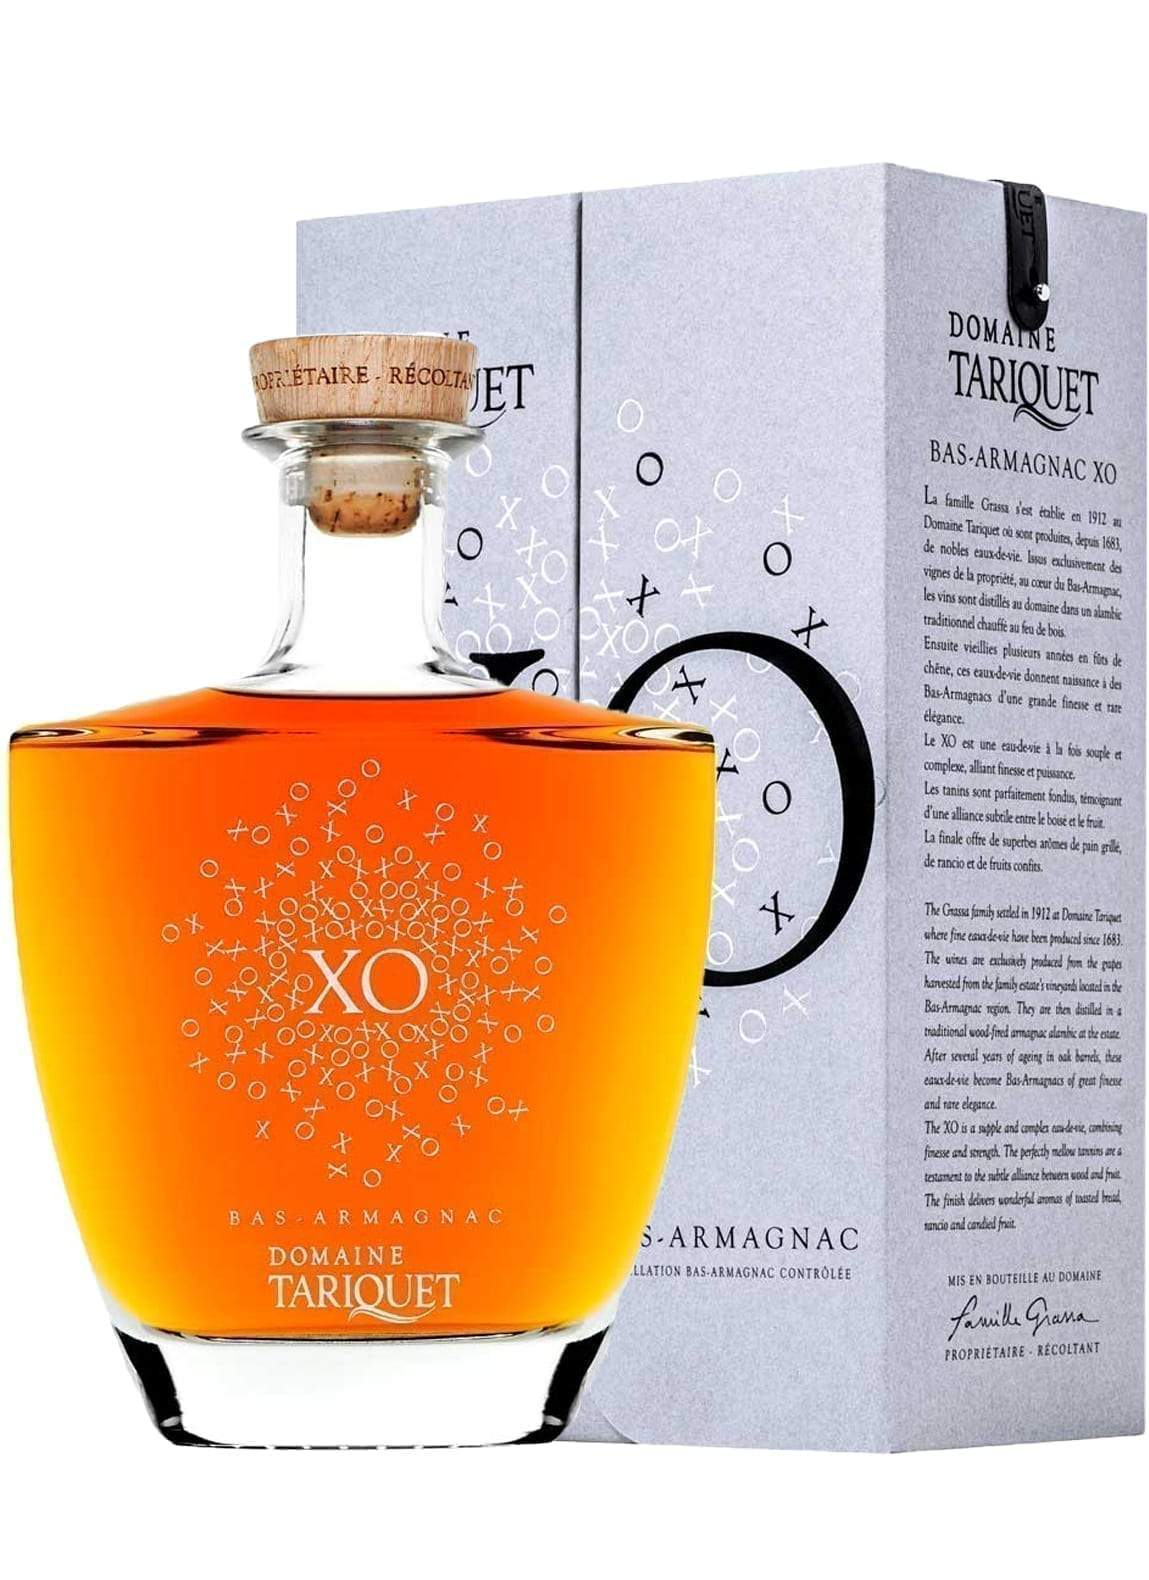 Domaine Tariquet Bas Armagnac XO 15 years Equilibre 40% 700ml | Brandy | Shop online at Spirits of France